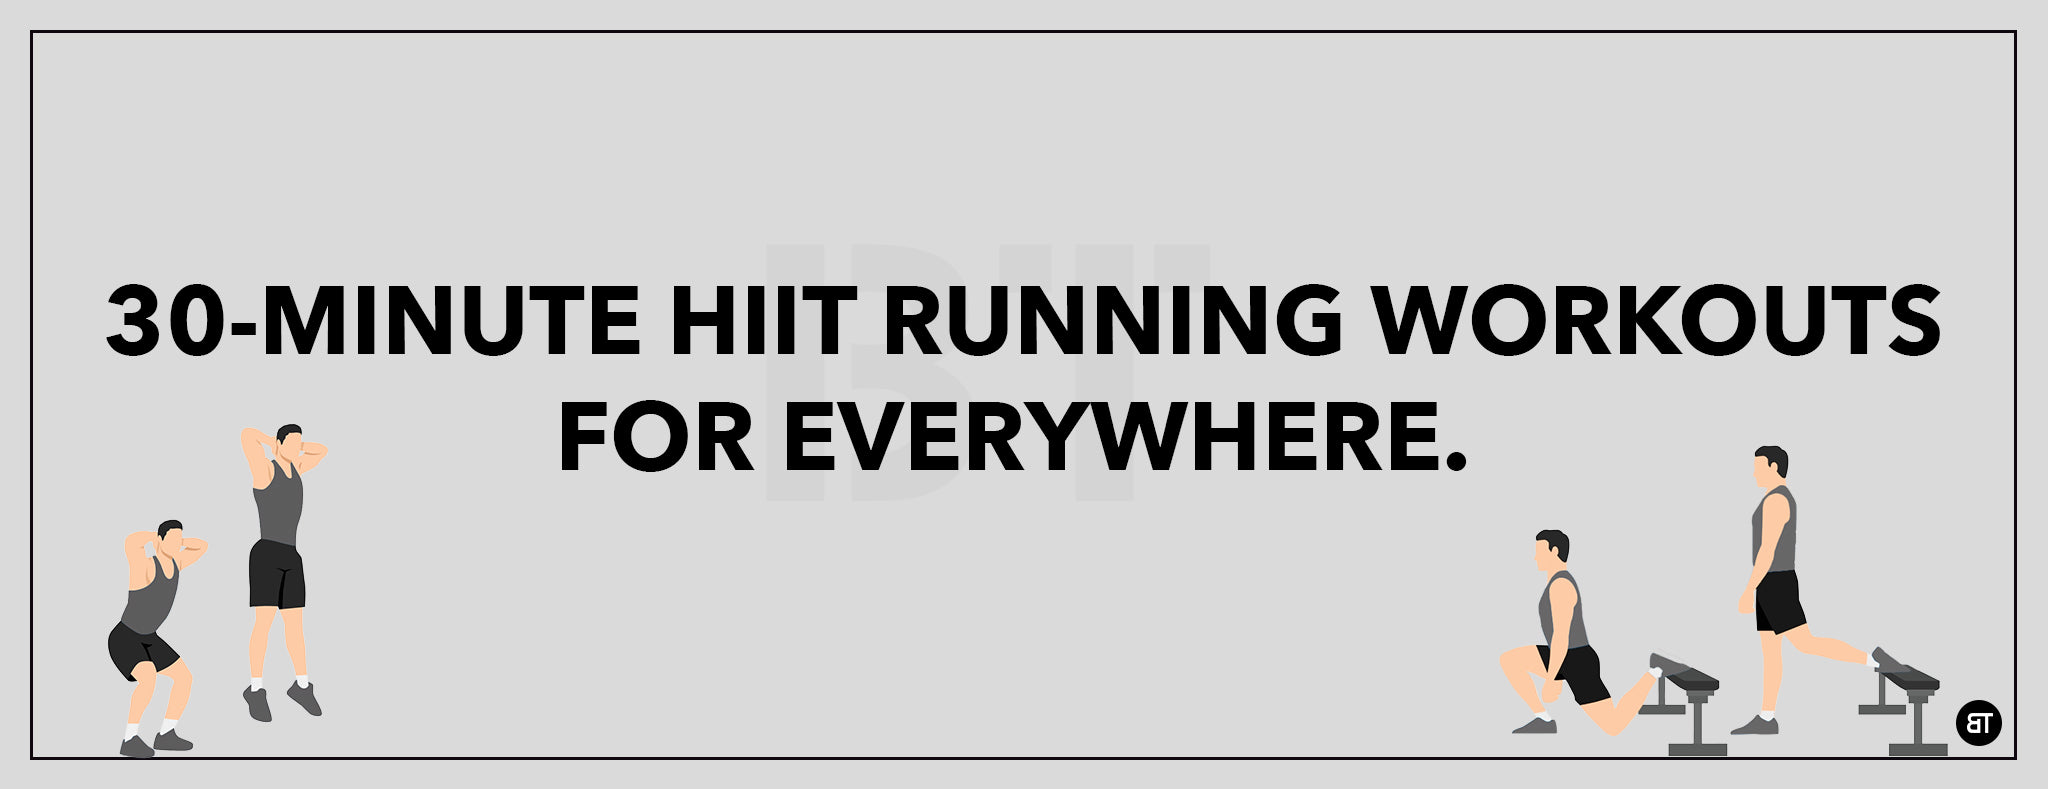 HIIT running workouts